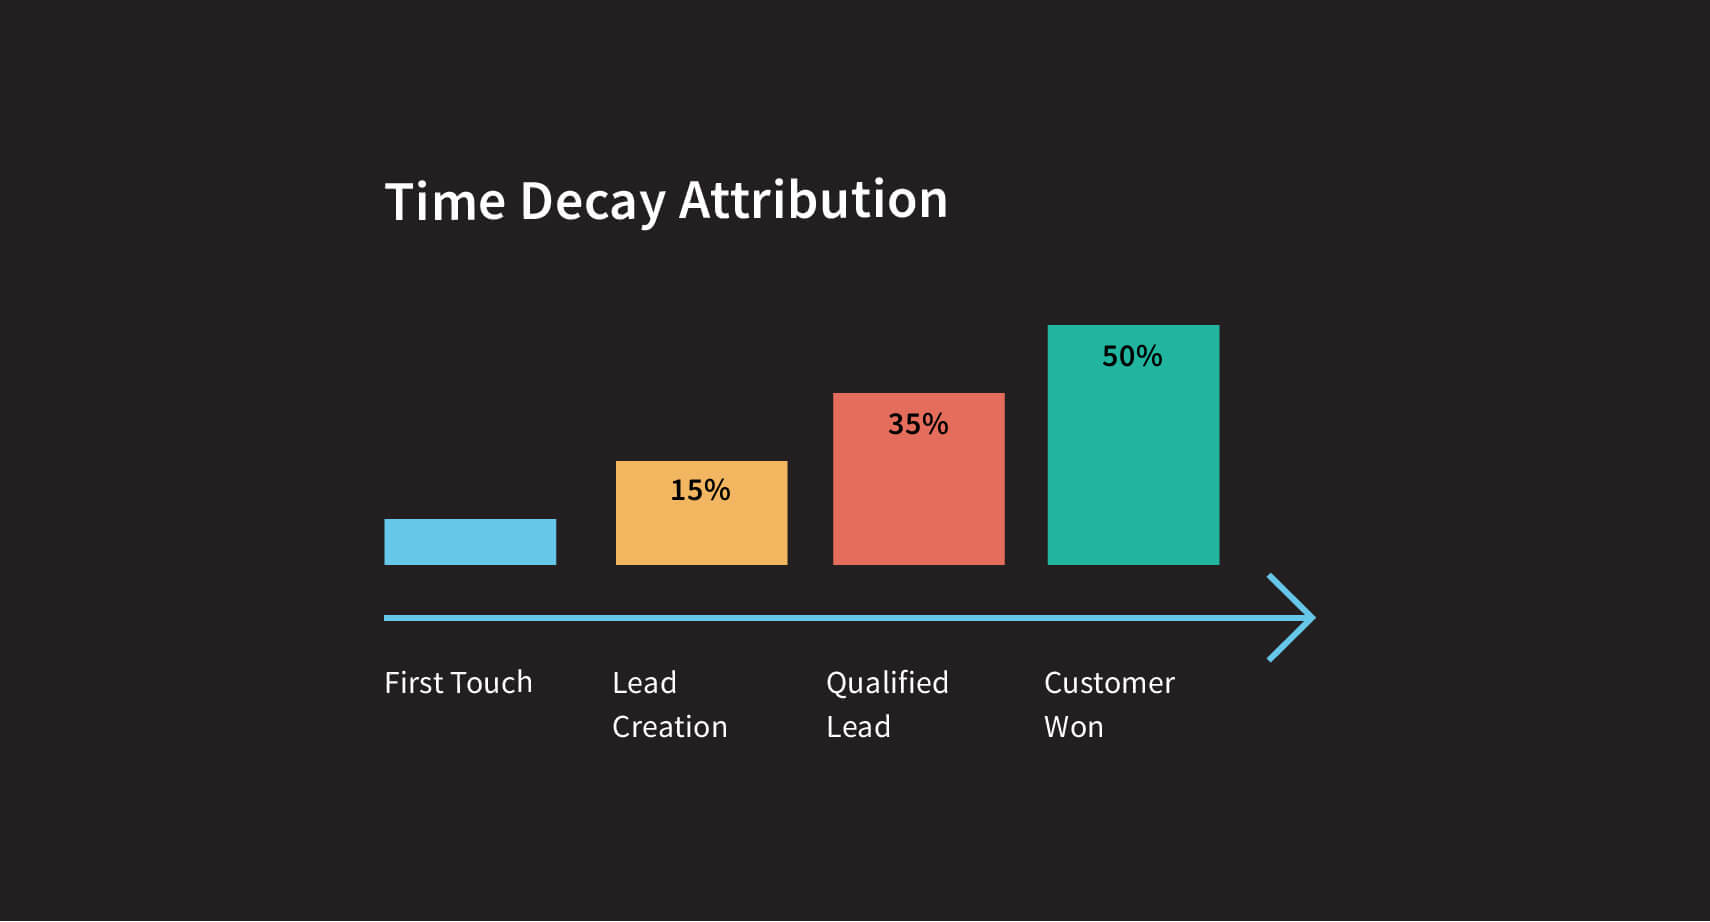 How the time-decay attribution model works